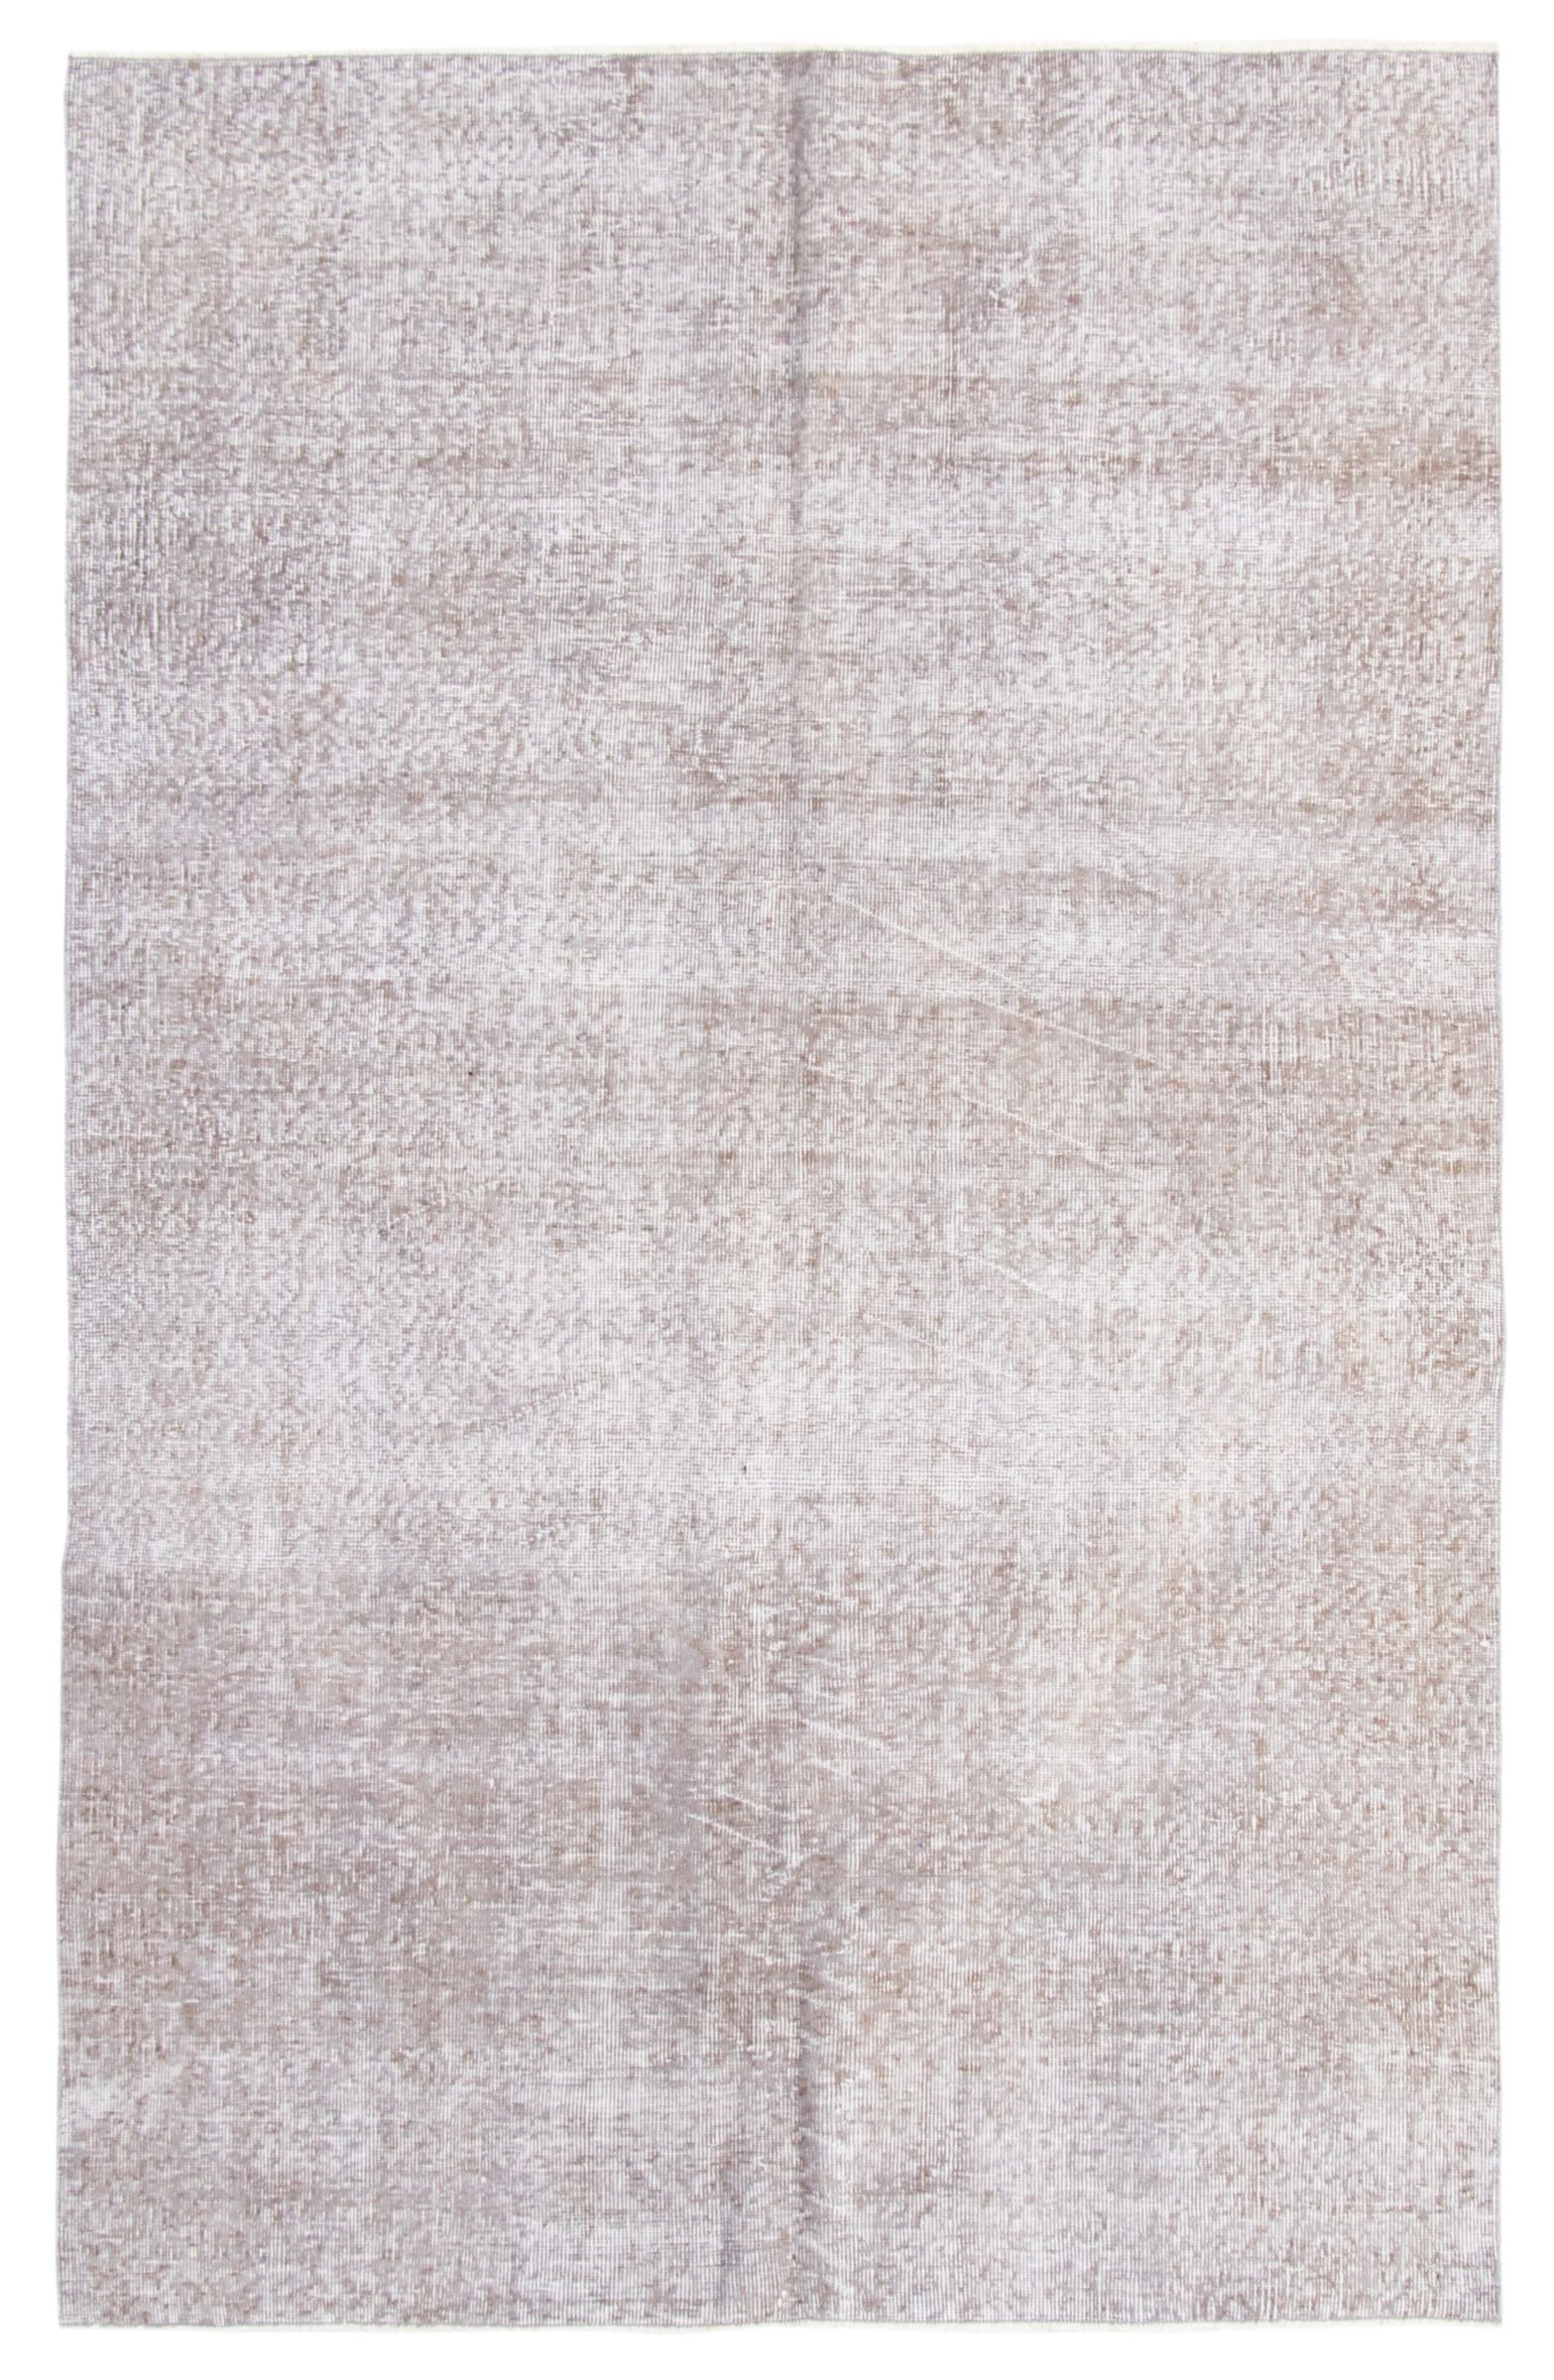 ECARPETGALLERY Hand-Knotted Color Transition Grey Wool Rug - 5'6 x 7'9